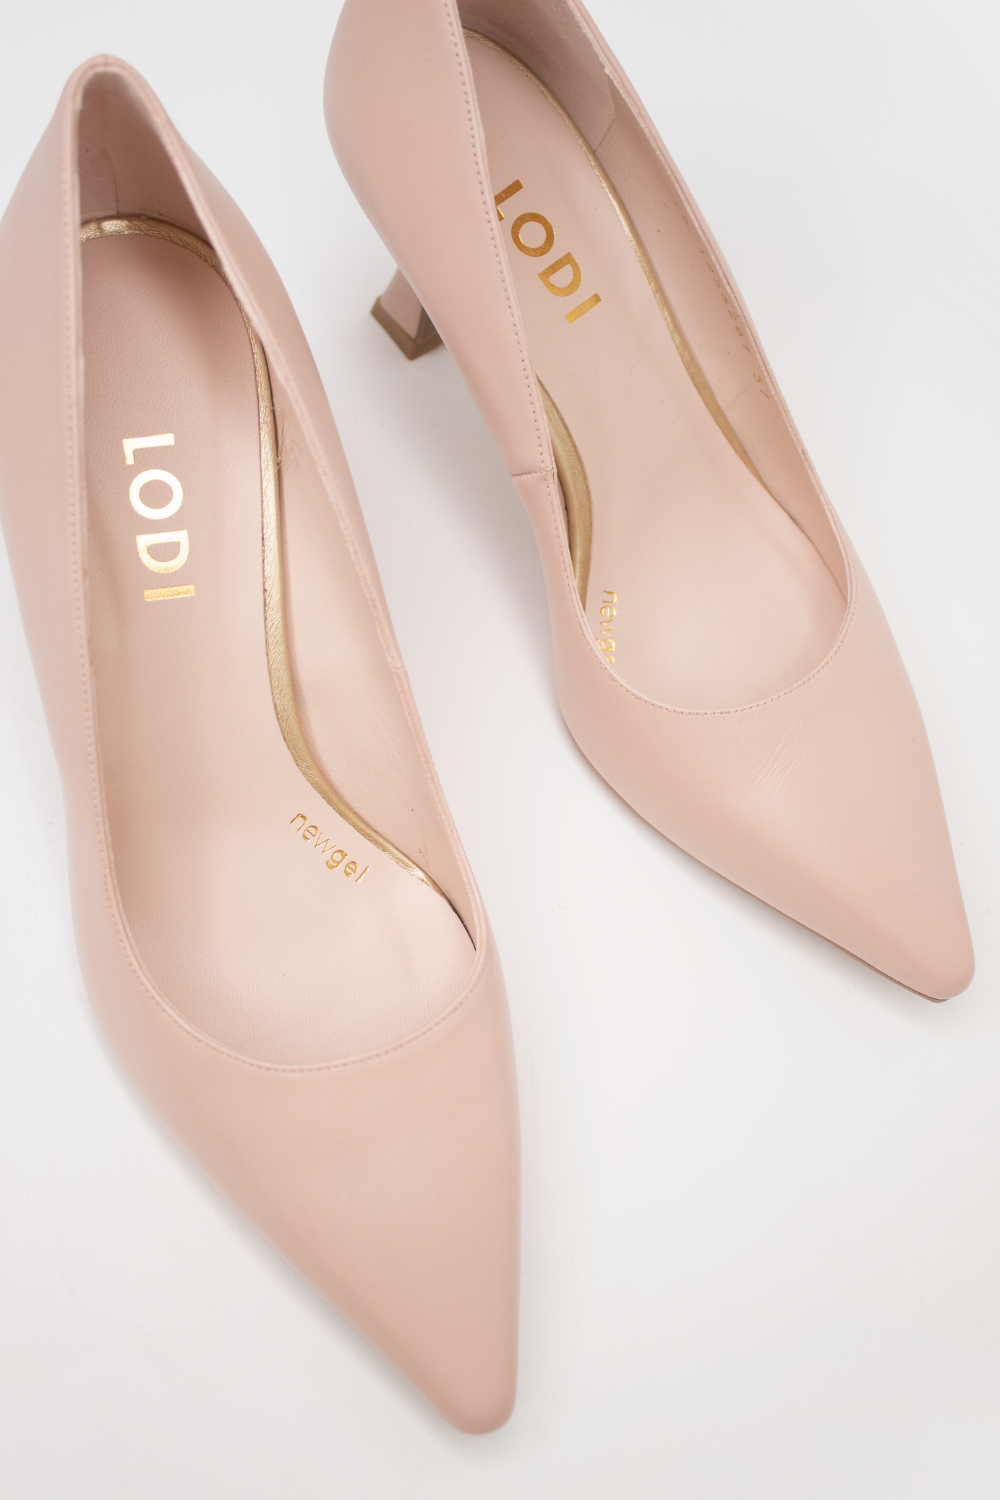 NUDE HEELED SHOES FROM LODI WITH FLARED HEEL 